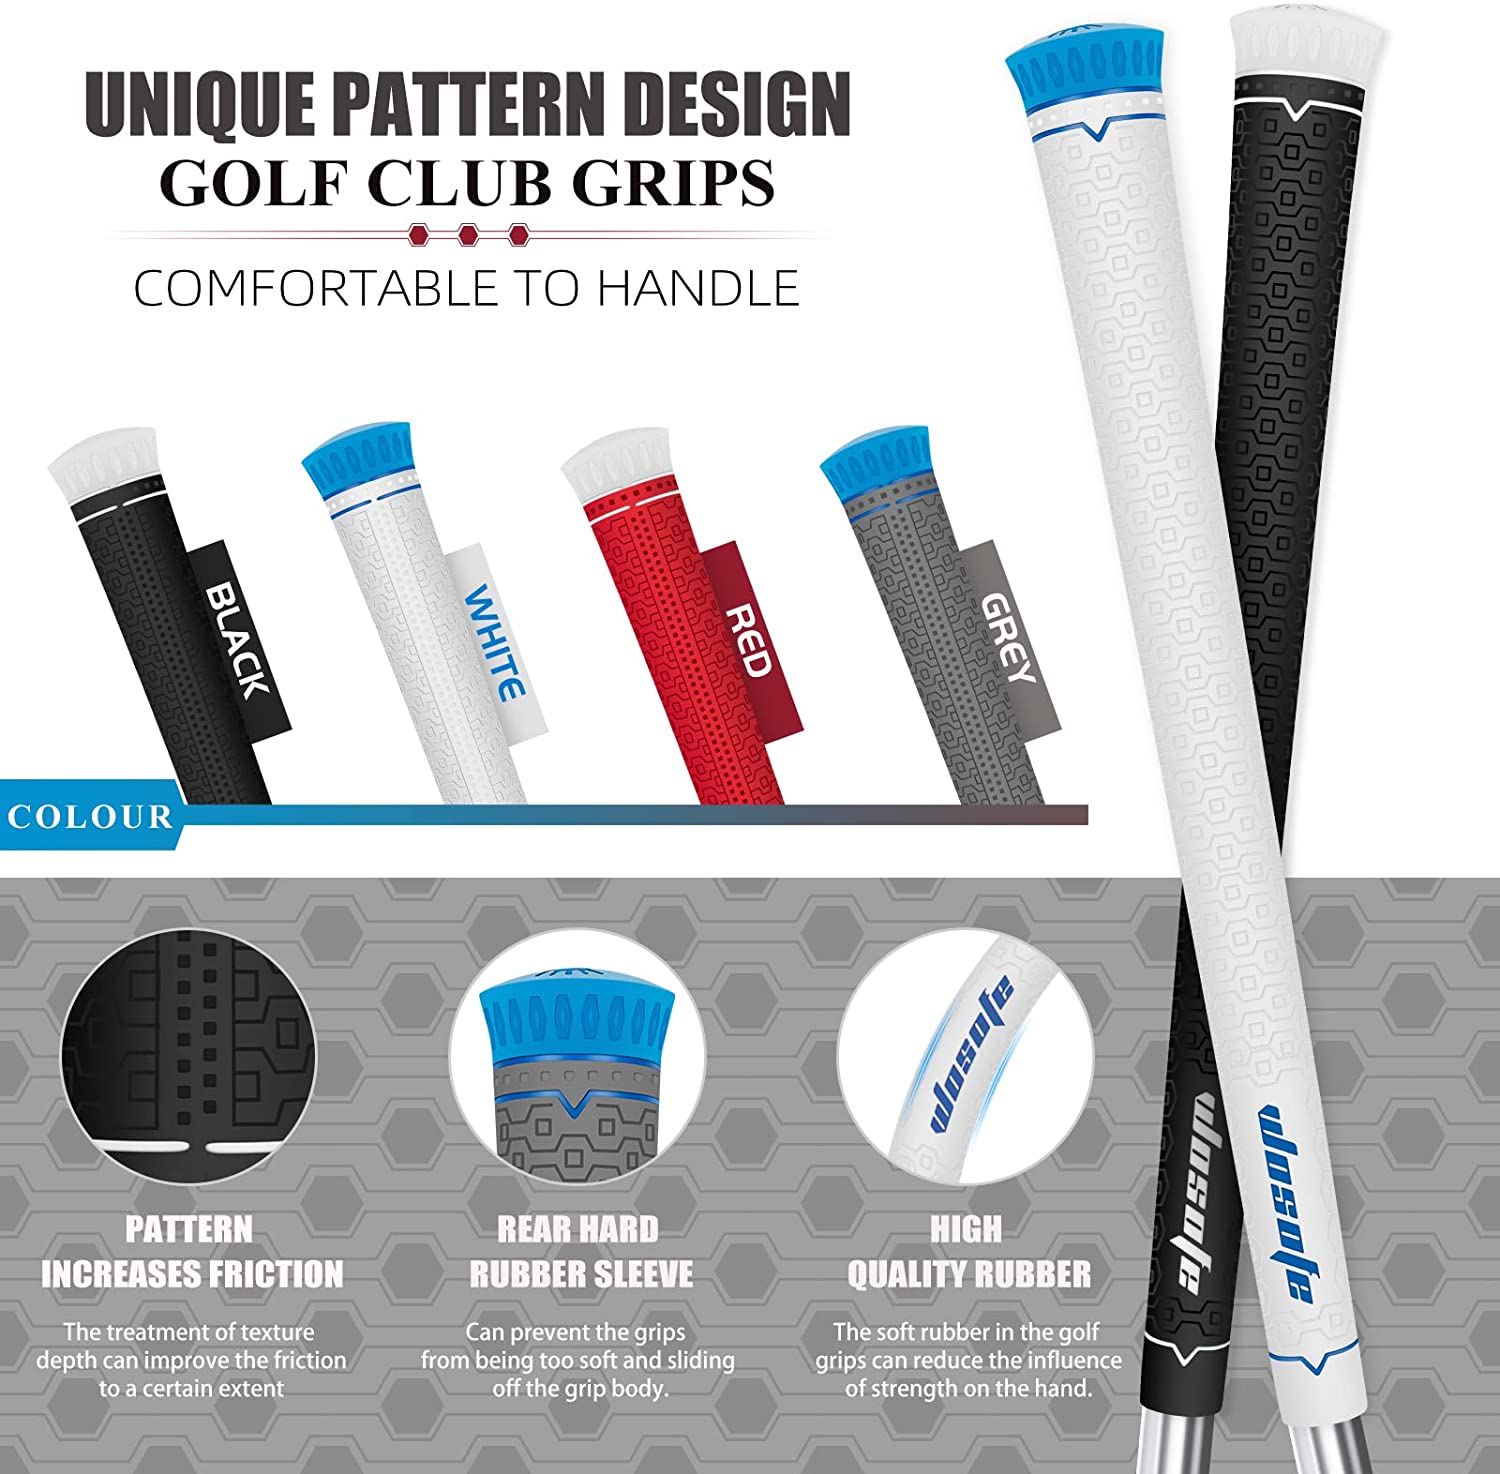 T-Grip™ - Improve your swing and lower your score! – T-Golfs